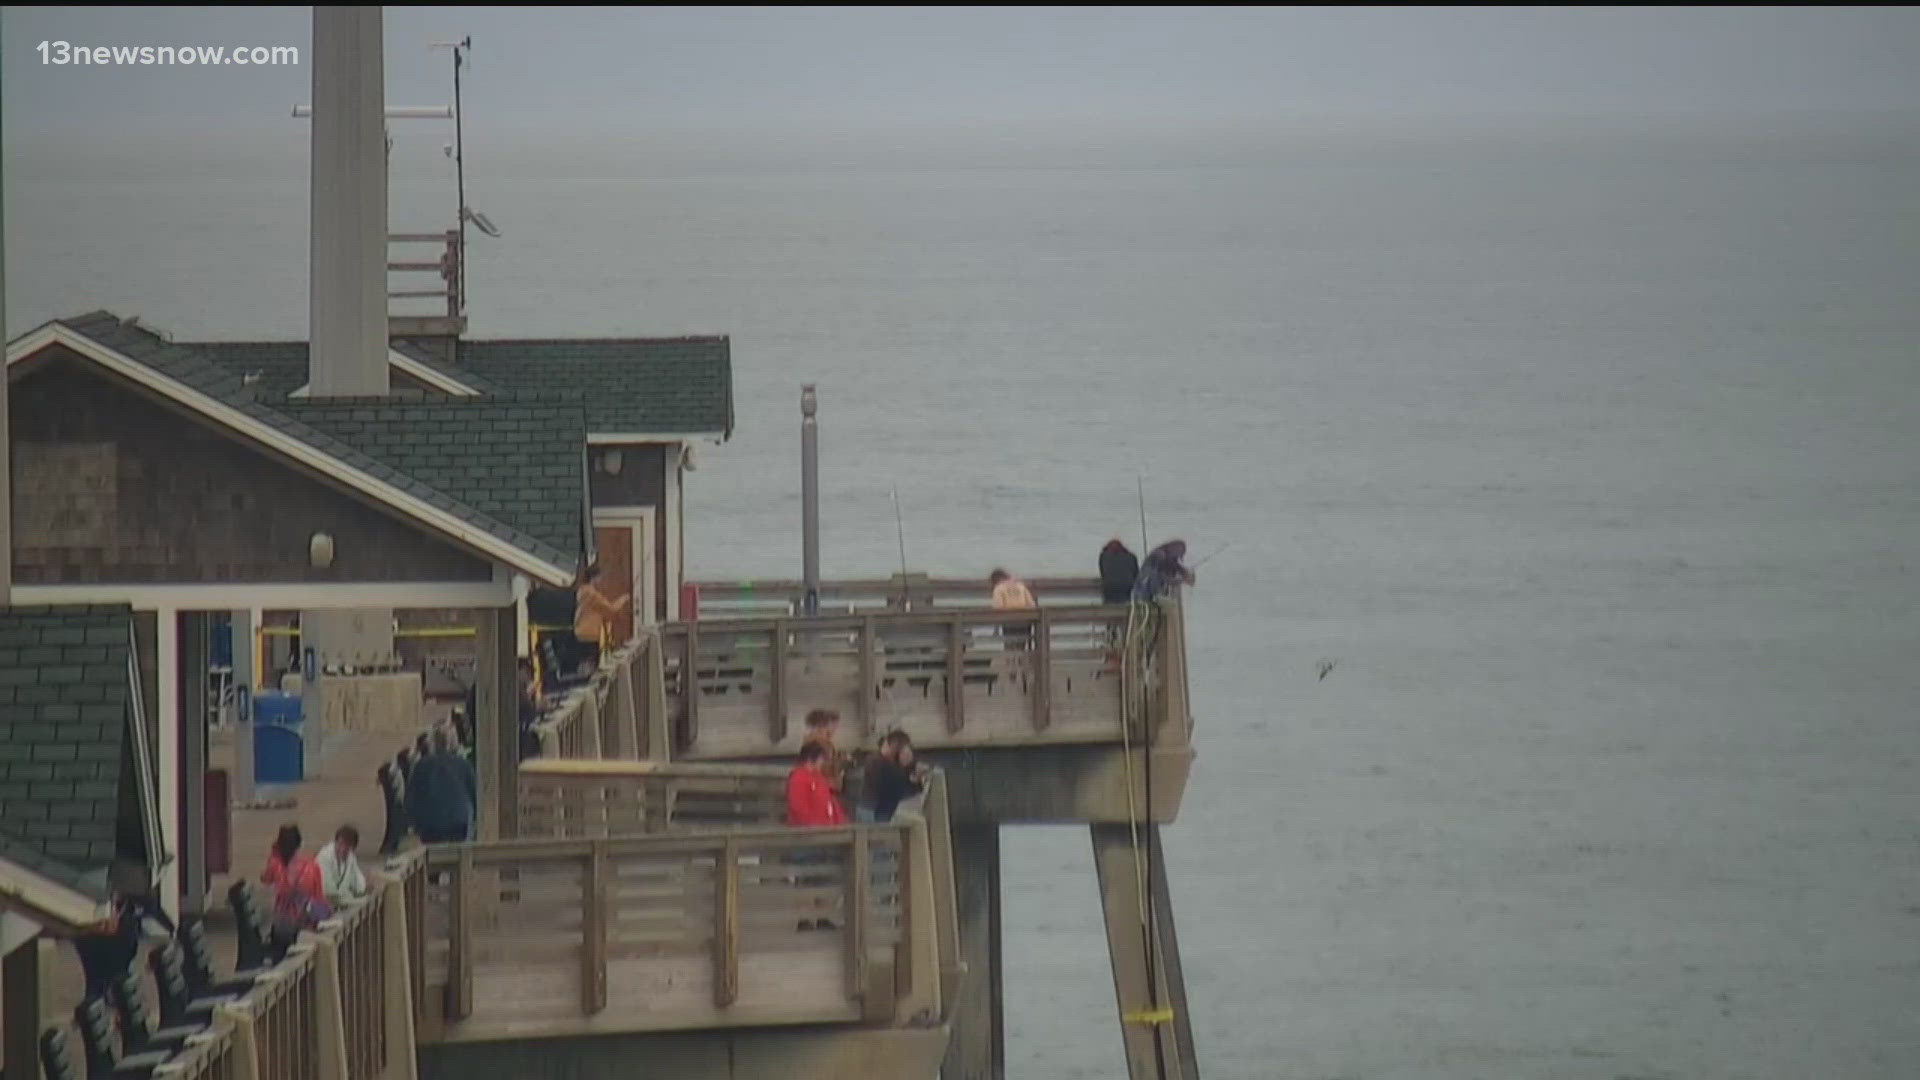 Jennette's Pier in Nags Head, North Carolina has reopened for its spring fishing season.